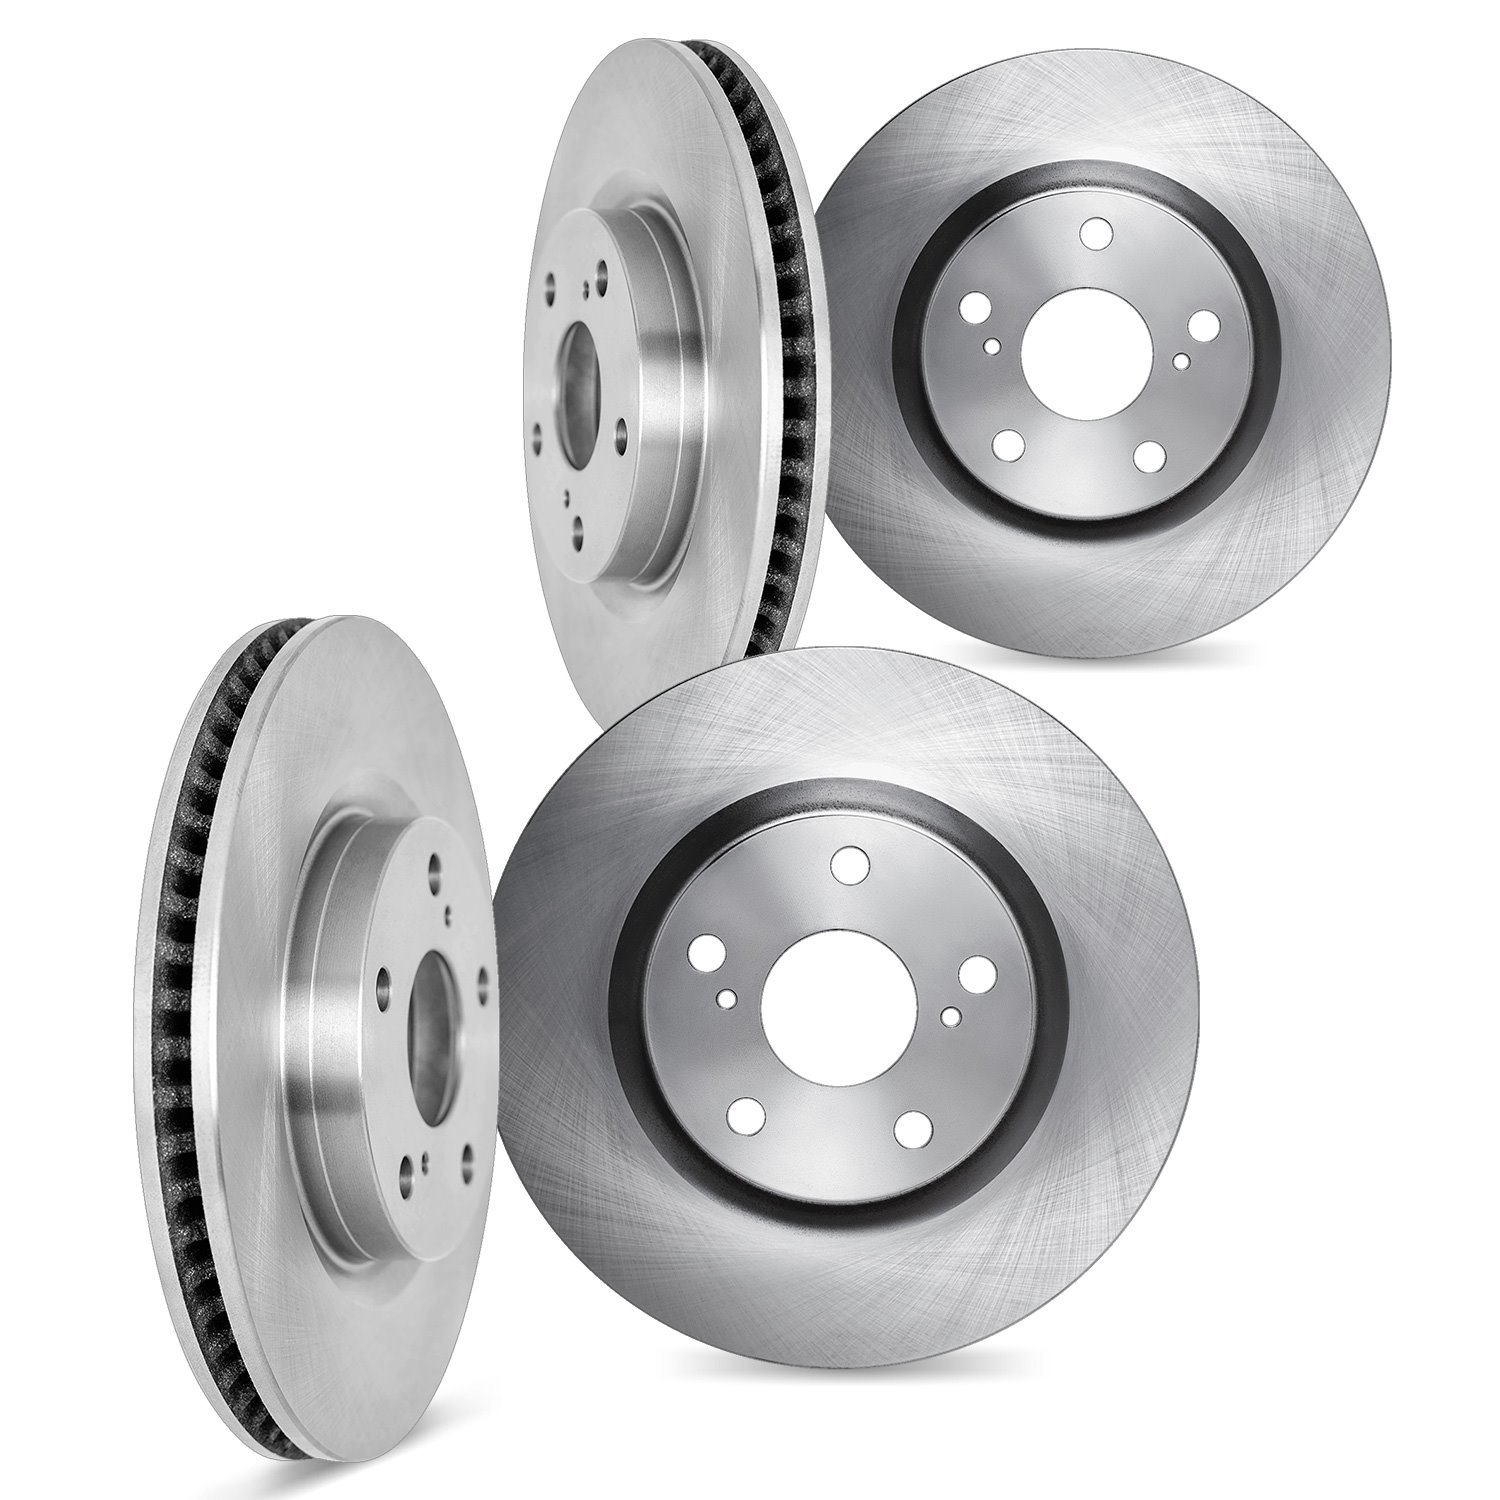 6004-11058 Brake Rotors, Fits Select Land Rover, Position: Front and Rear